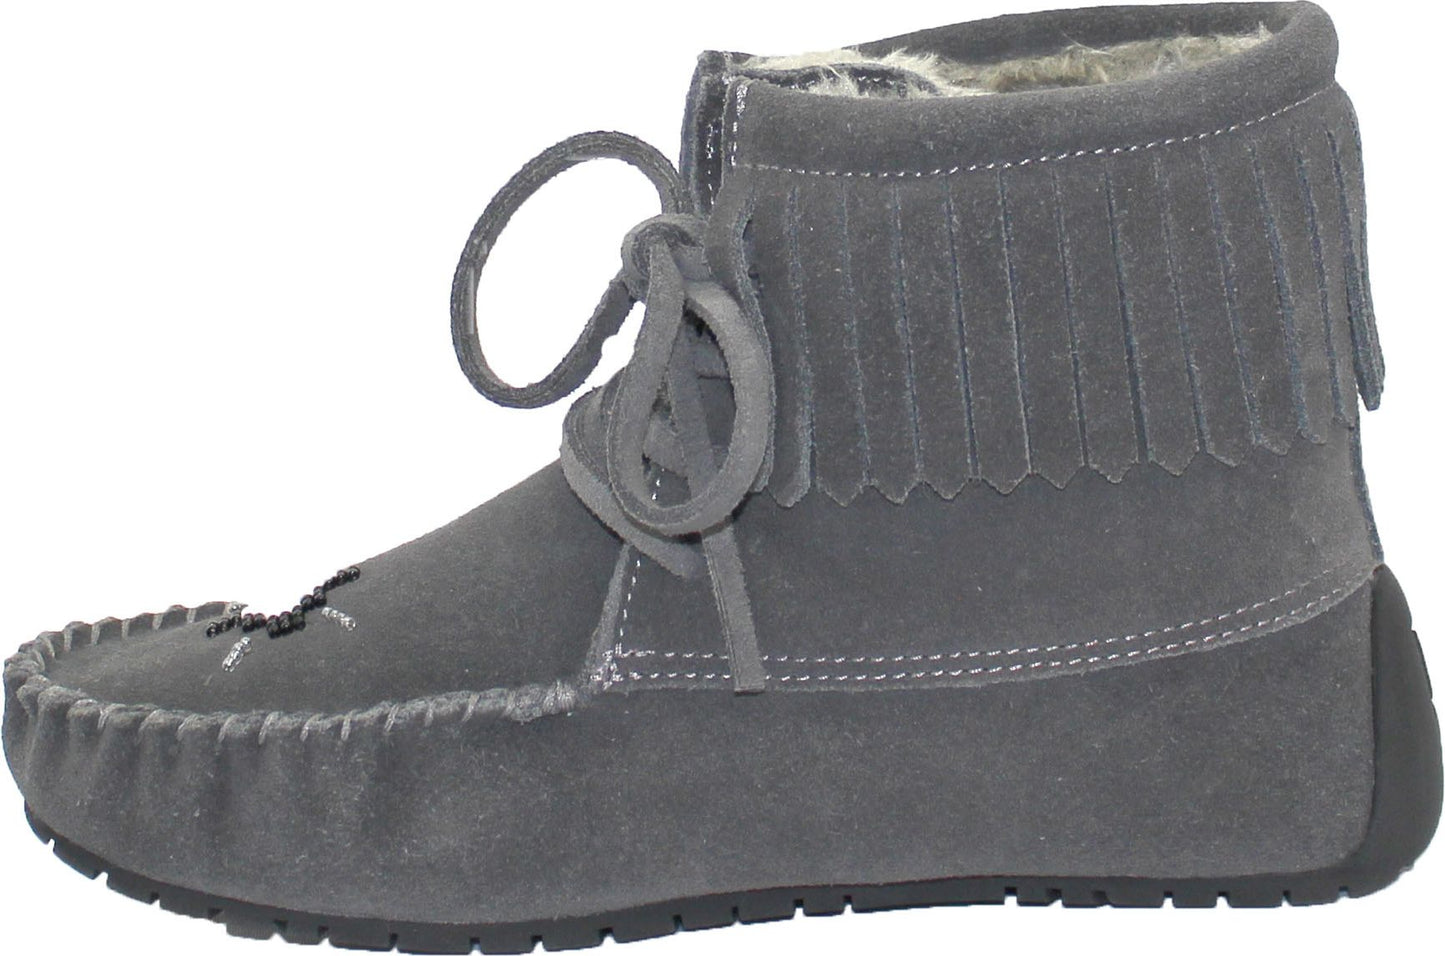 Urban Trail Boots Short Laceup Charcoal Suede Boot